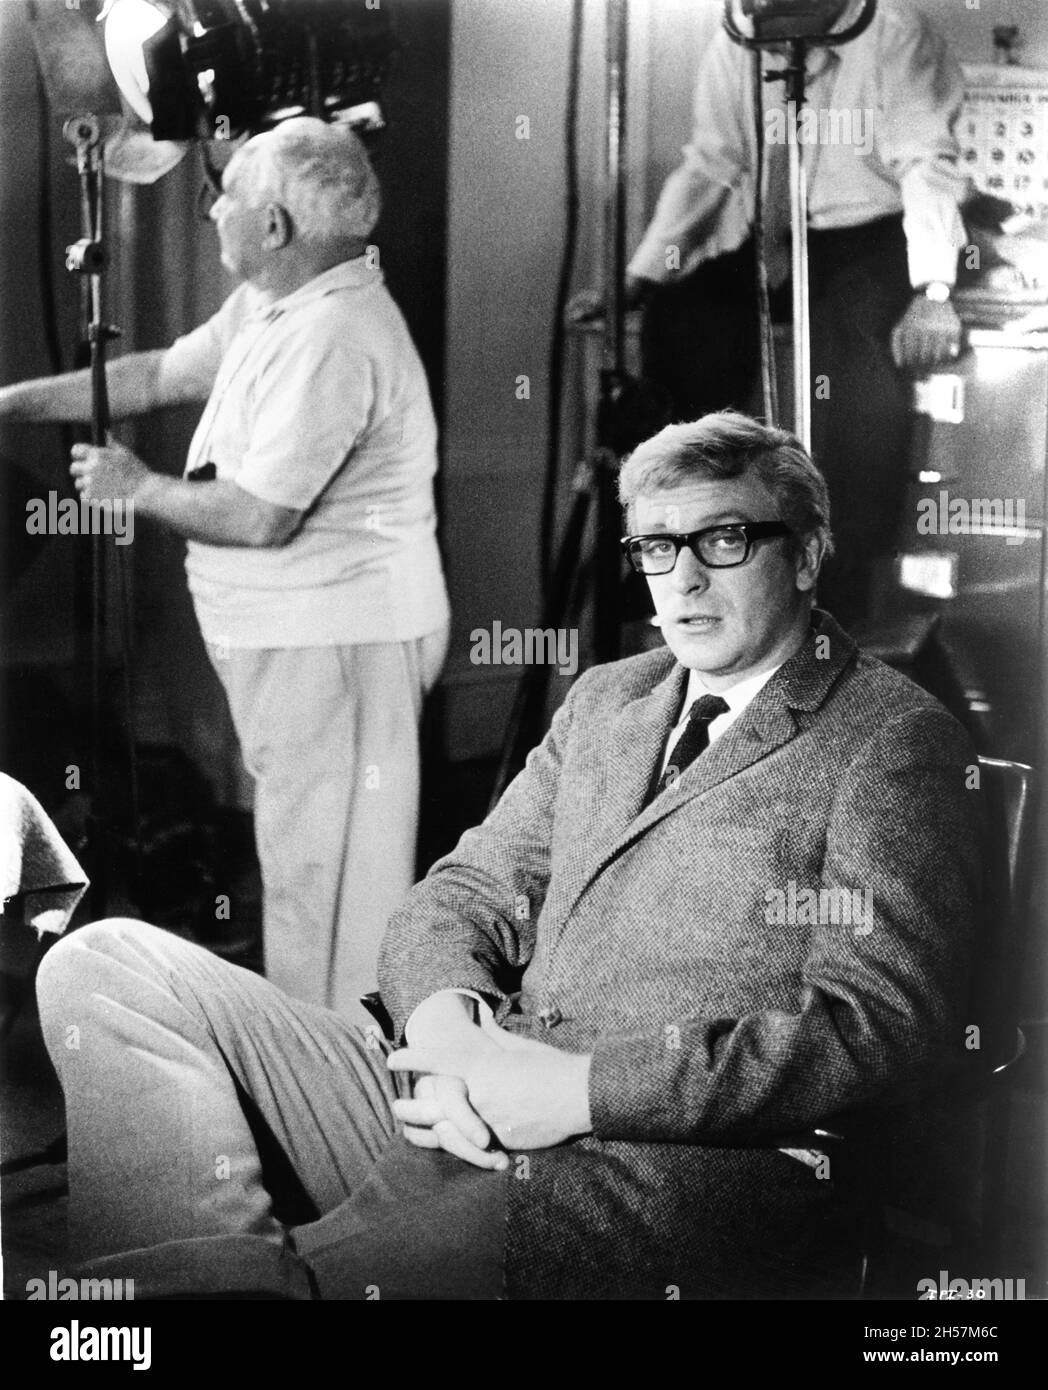 Cinematographer OTTO HELLER and MICHAEL CAINE as Harry Palmer on set candid during filming of THE IPCRESS FILE 1965 director SIDNEY J. FURIE novel Len Deighton music John Barry producer Harry Saltzman The Rank Organisation / Lowndes Productions Ltd / Steven S.A. Stock Photo